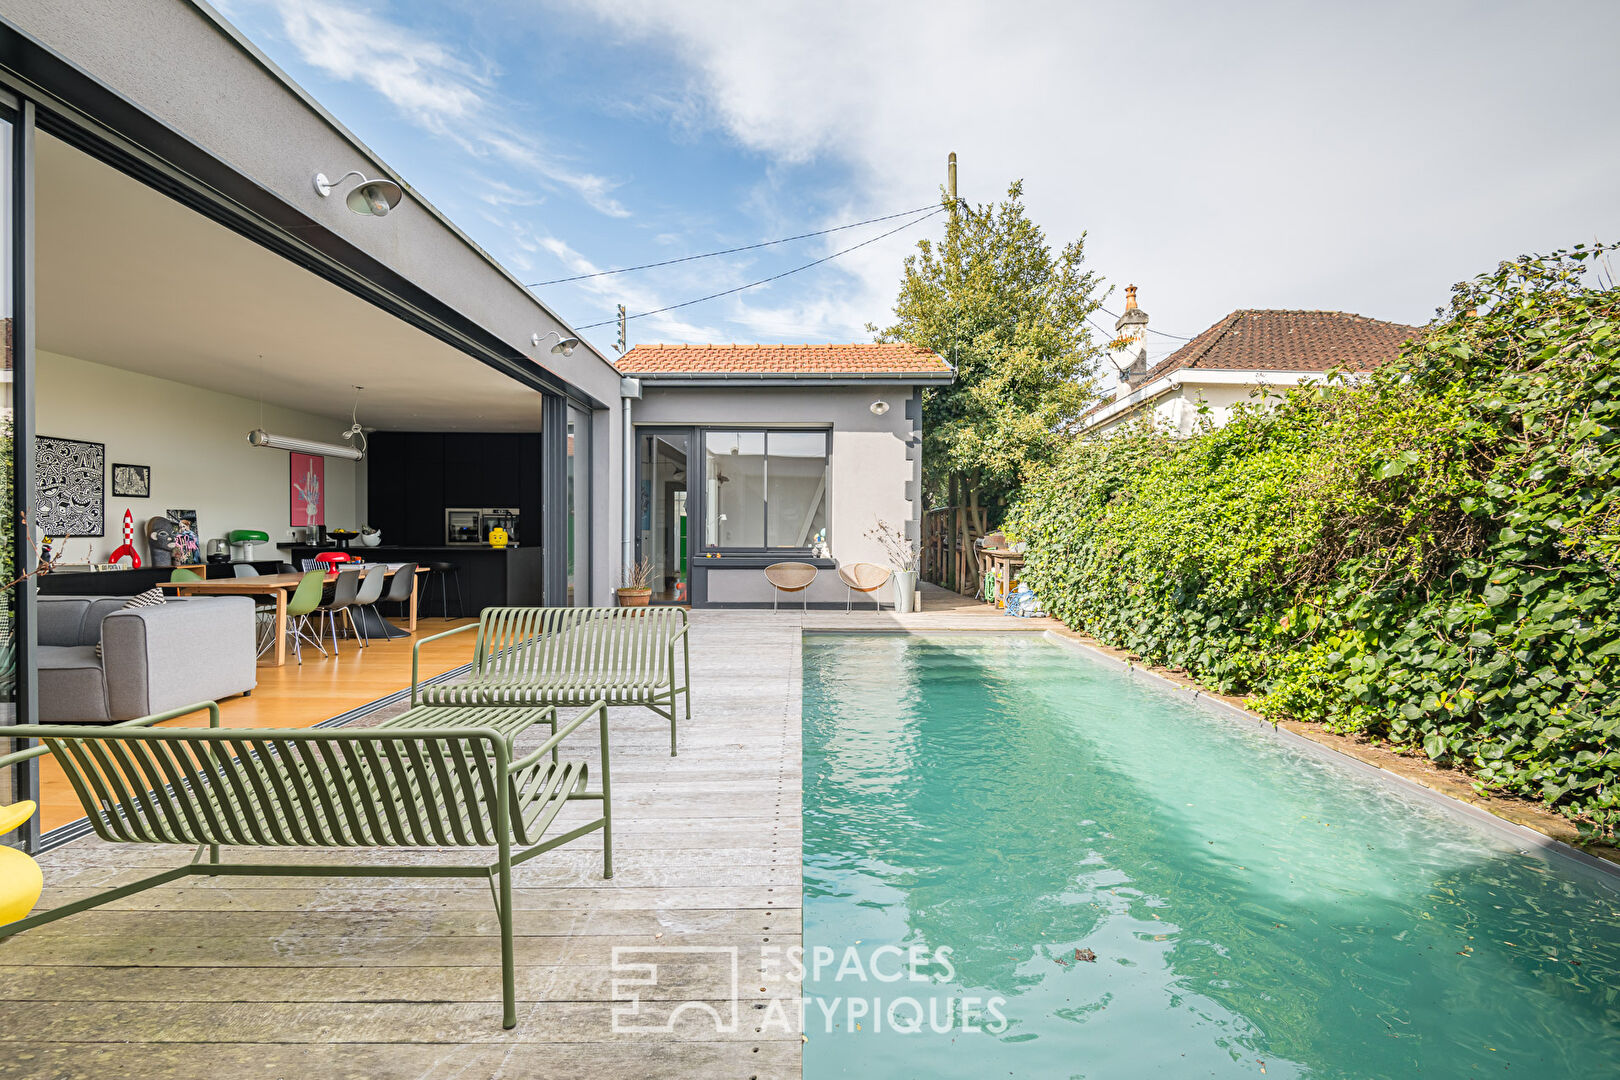 The contemporary boutique with garden and swimming pool